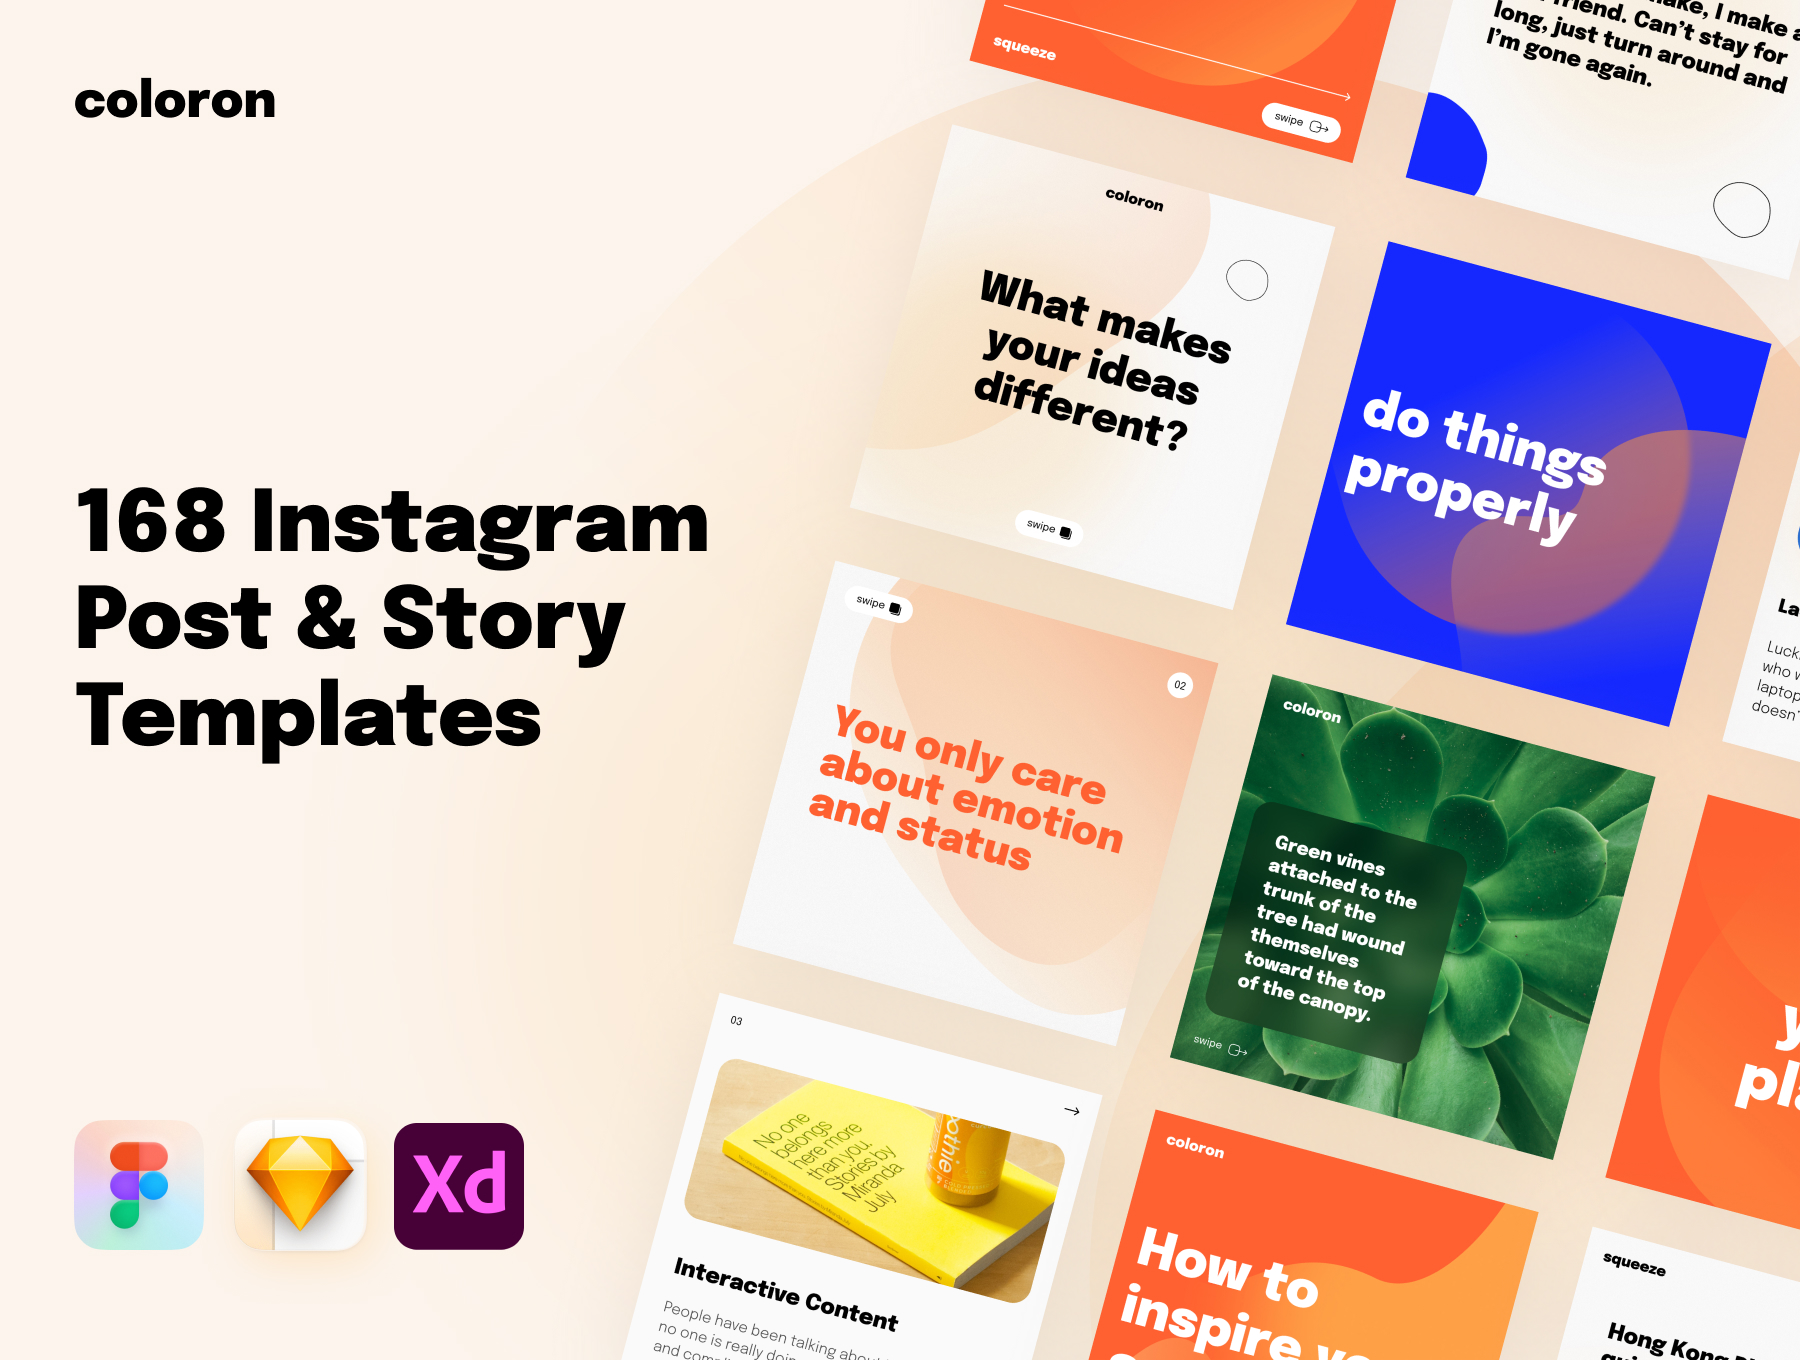 coloron-instagram-post-story-templates_cover_1610398843698